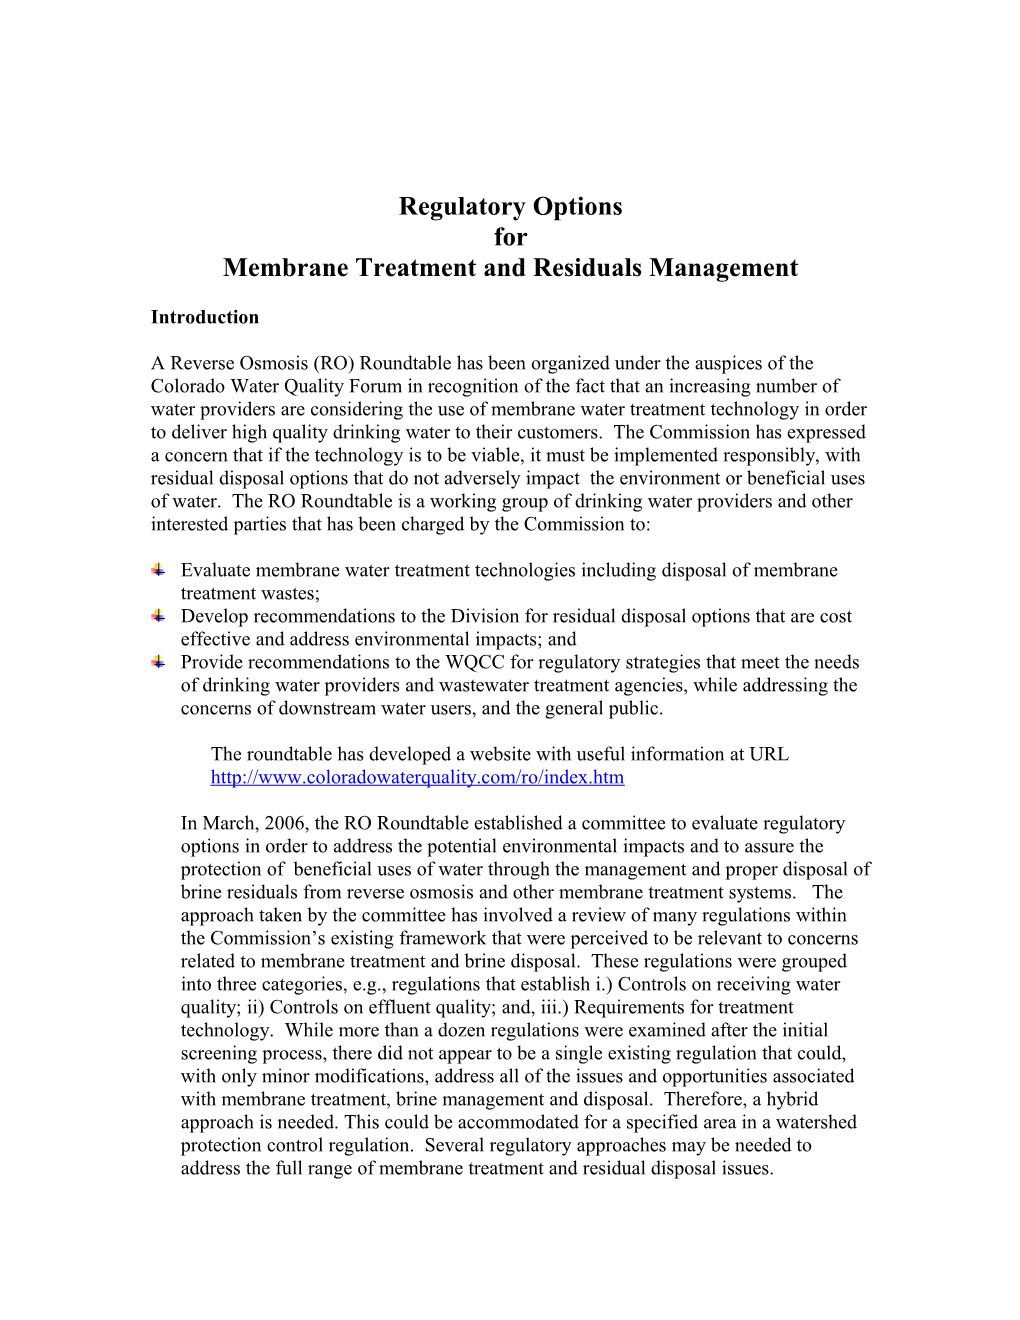 Membrane Treatment and Residuals Management